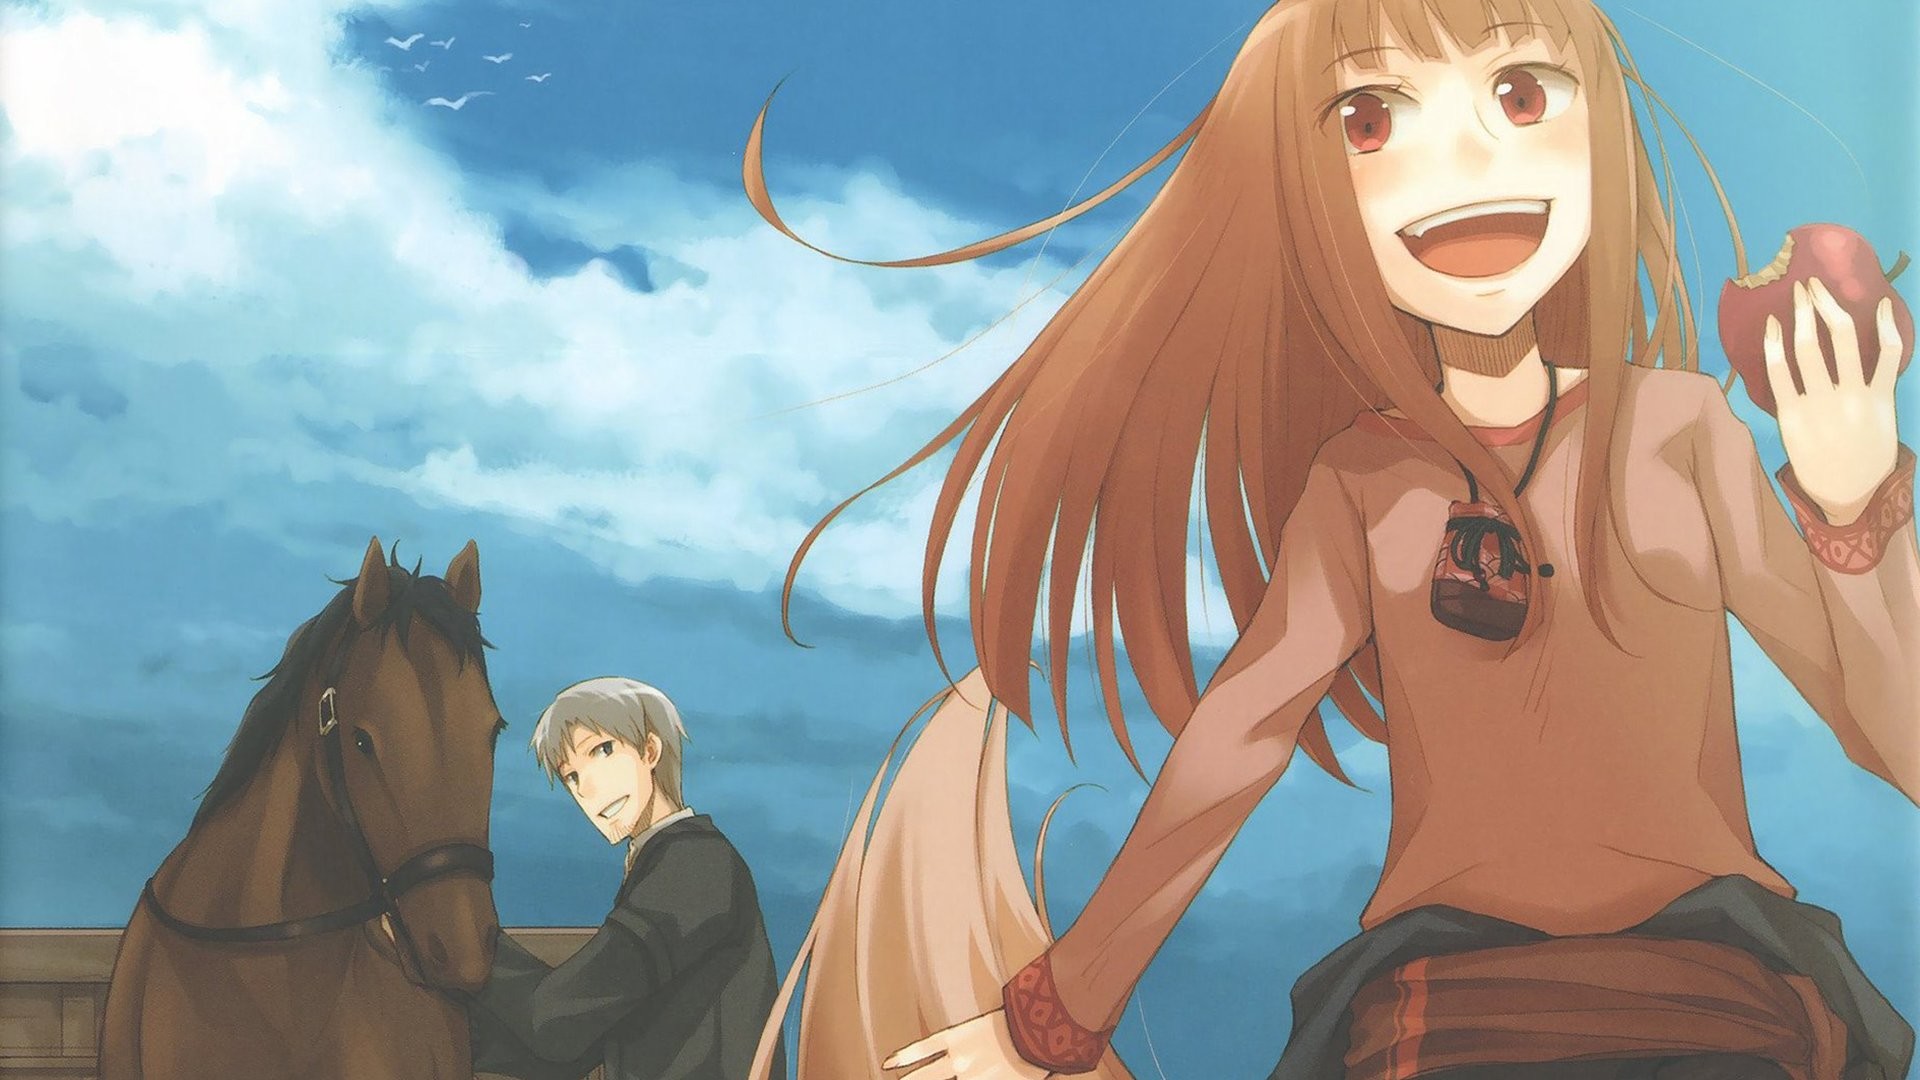 HD Wallpaper Background ID177296. Anime Spice and Wolf